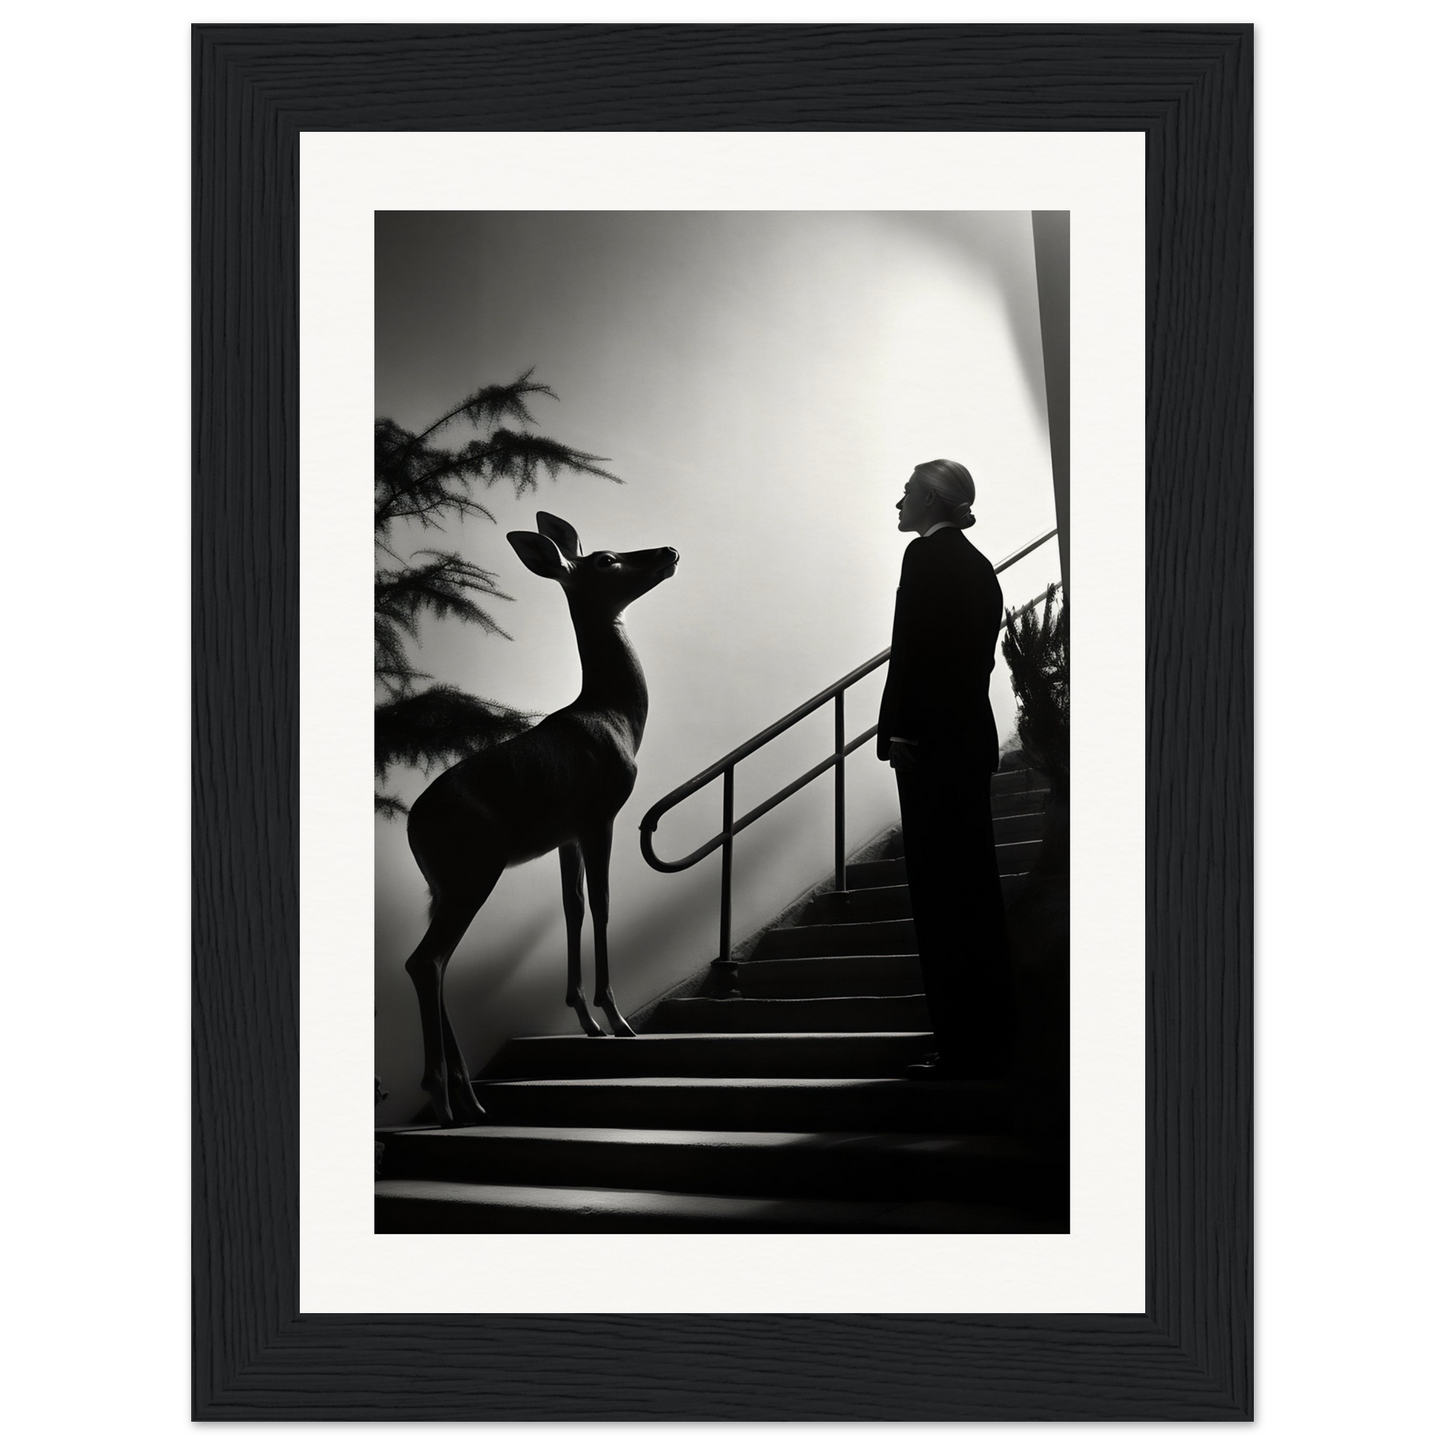 A man in a suit standing next to a deer on the stairs, perfect for The Runway The Oracle Windows™ Collection wall art poster for my wall.